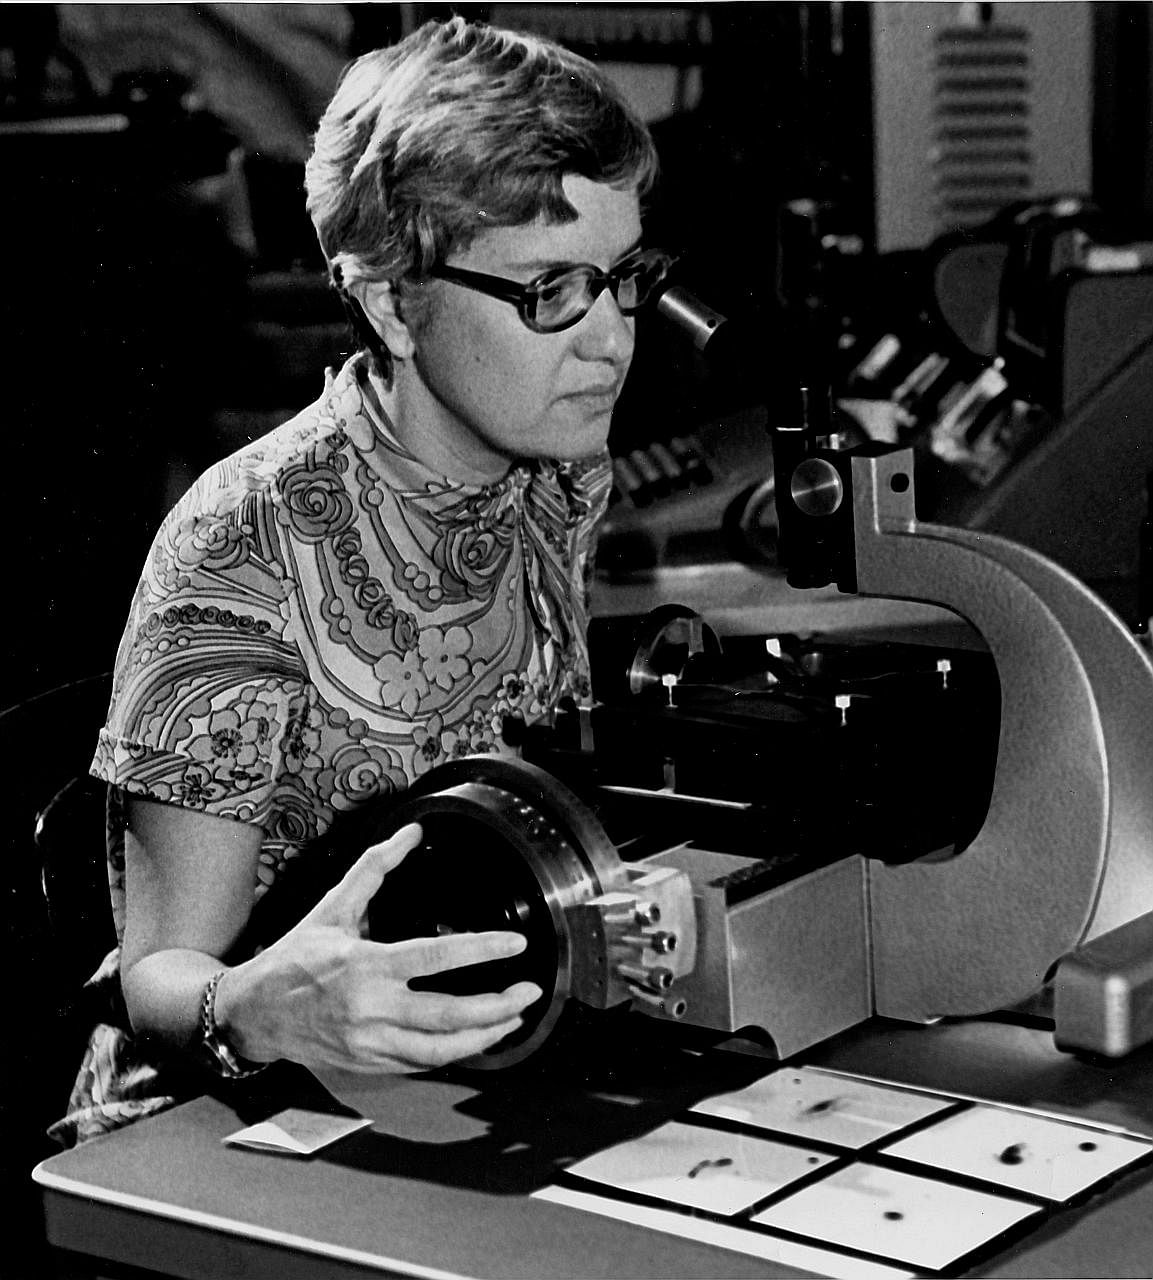 Dr Vera Rubin at work in the 1970s. The astrophysicist, who died on Christmas Day, was overlooked for a Nobel despite her groundbreaking work on dark matter. Had she won the prize, she would have been celebrated as an inspiration for aspiring scienti